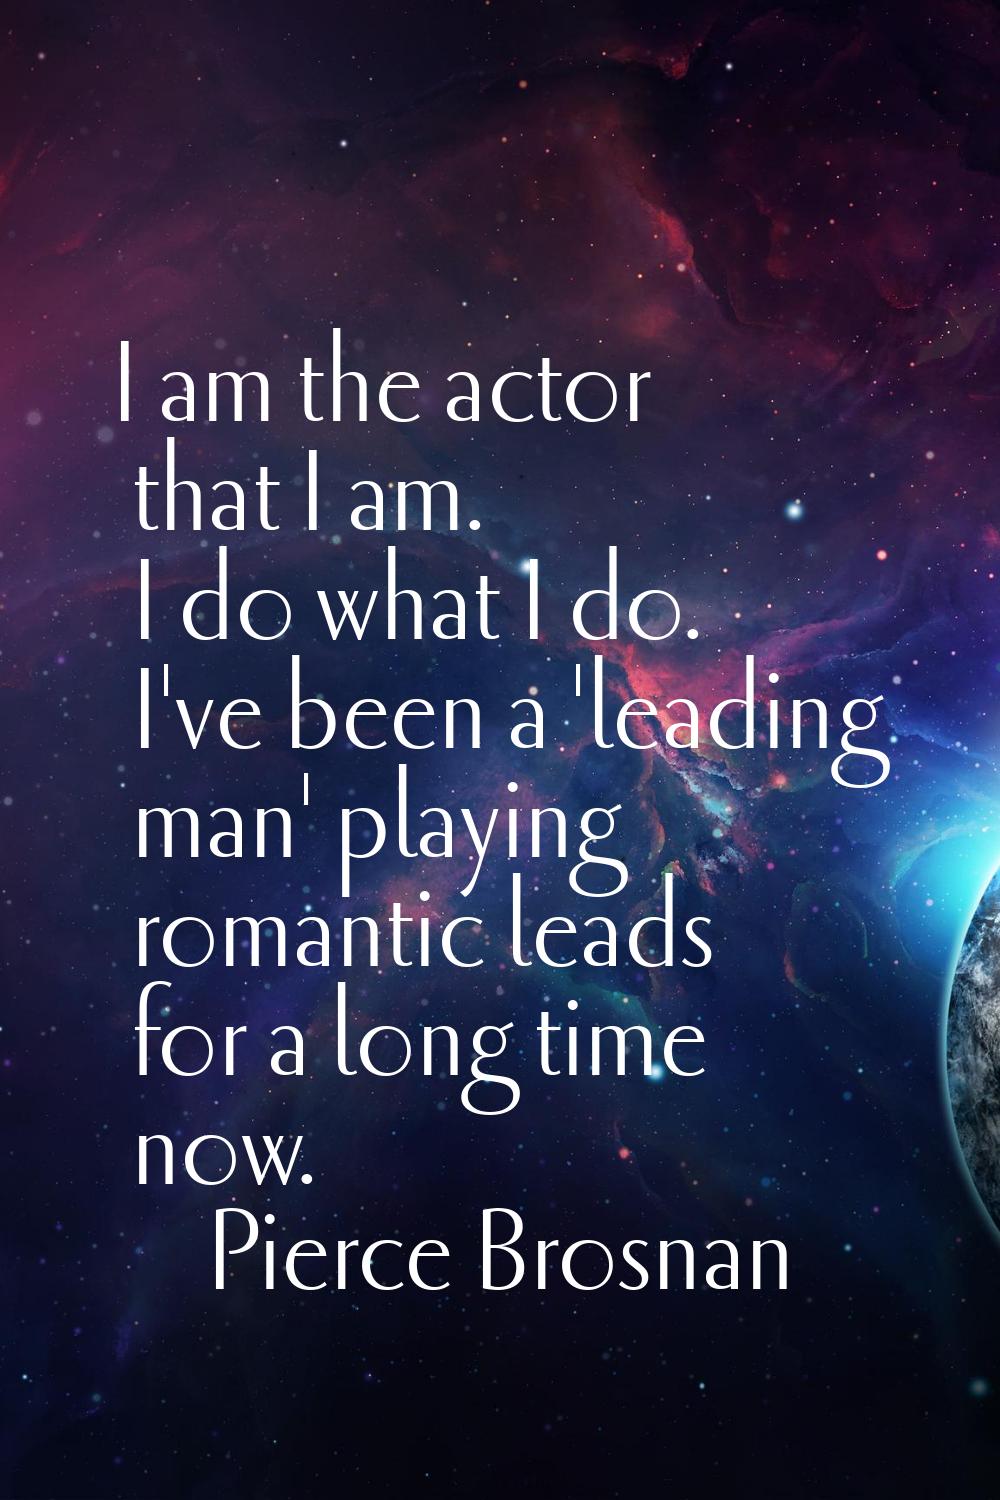 I am the actor that I am. I do what I do. I've been a 'leading man' playing romantic leads for a lo